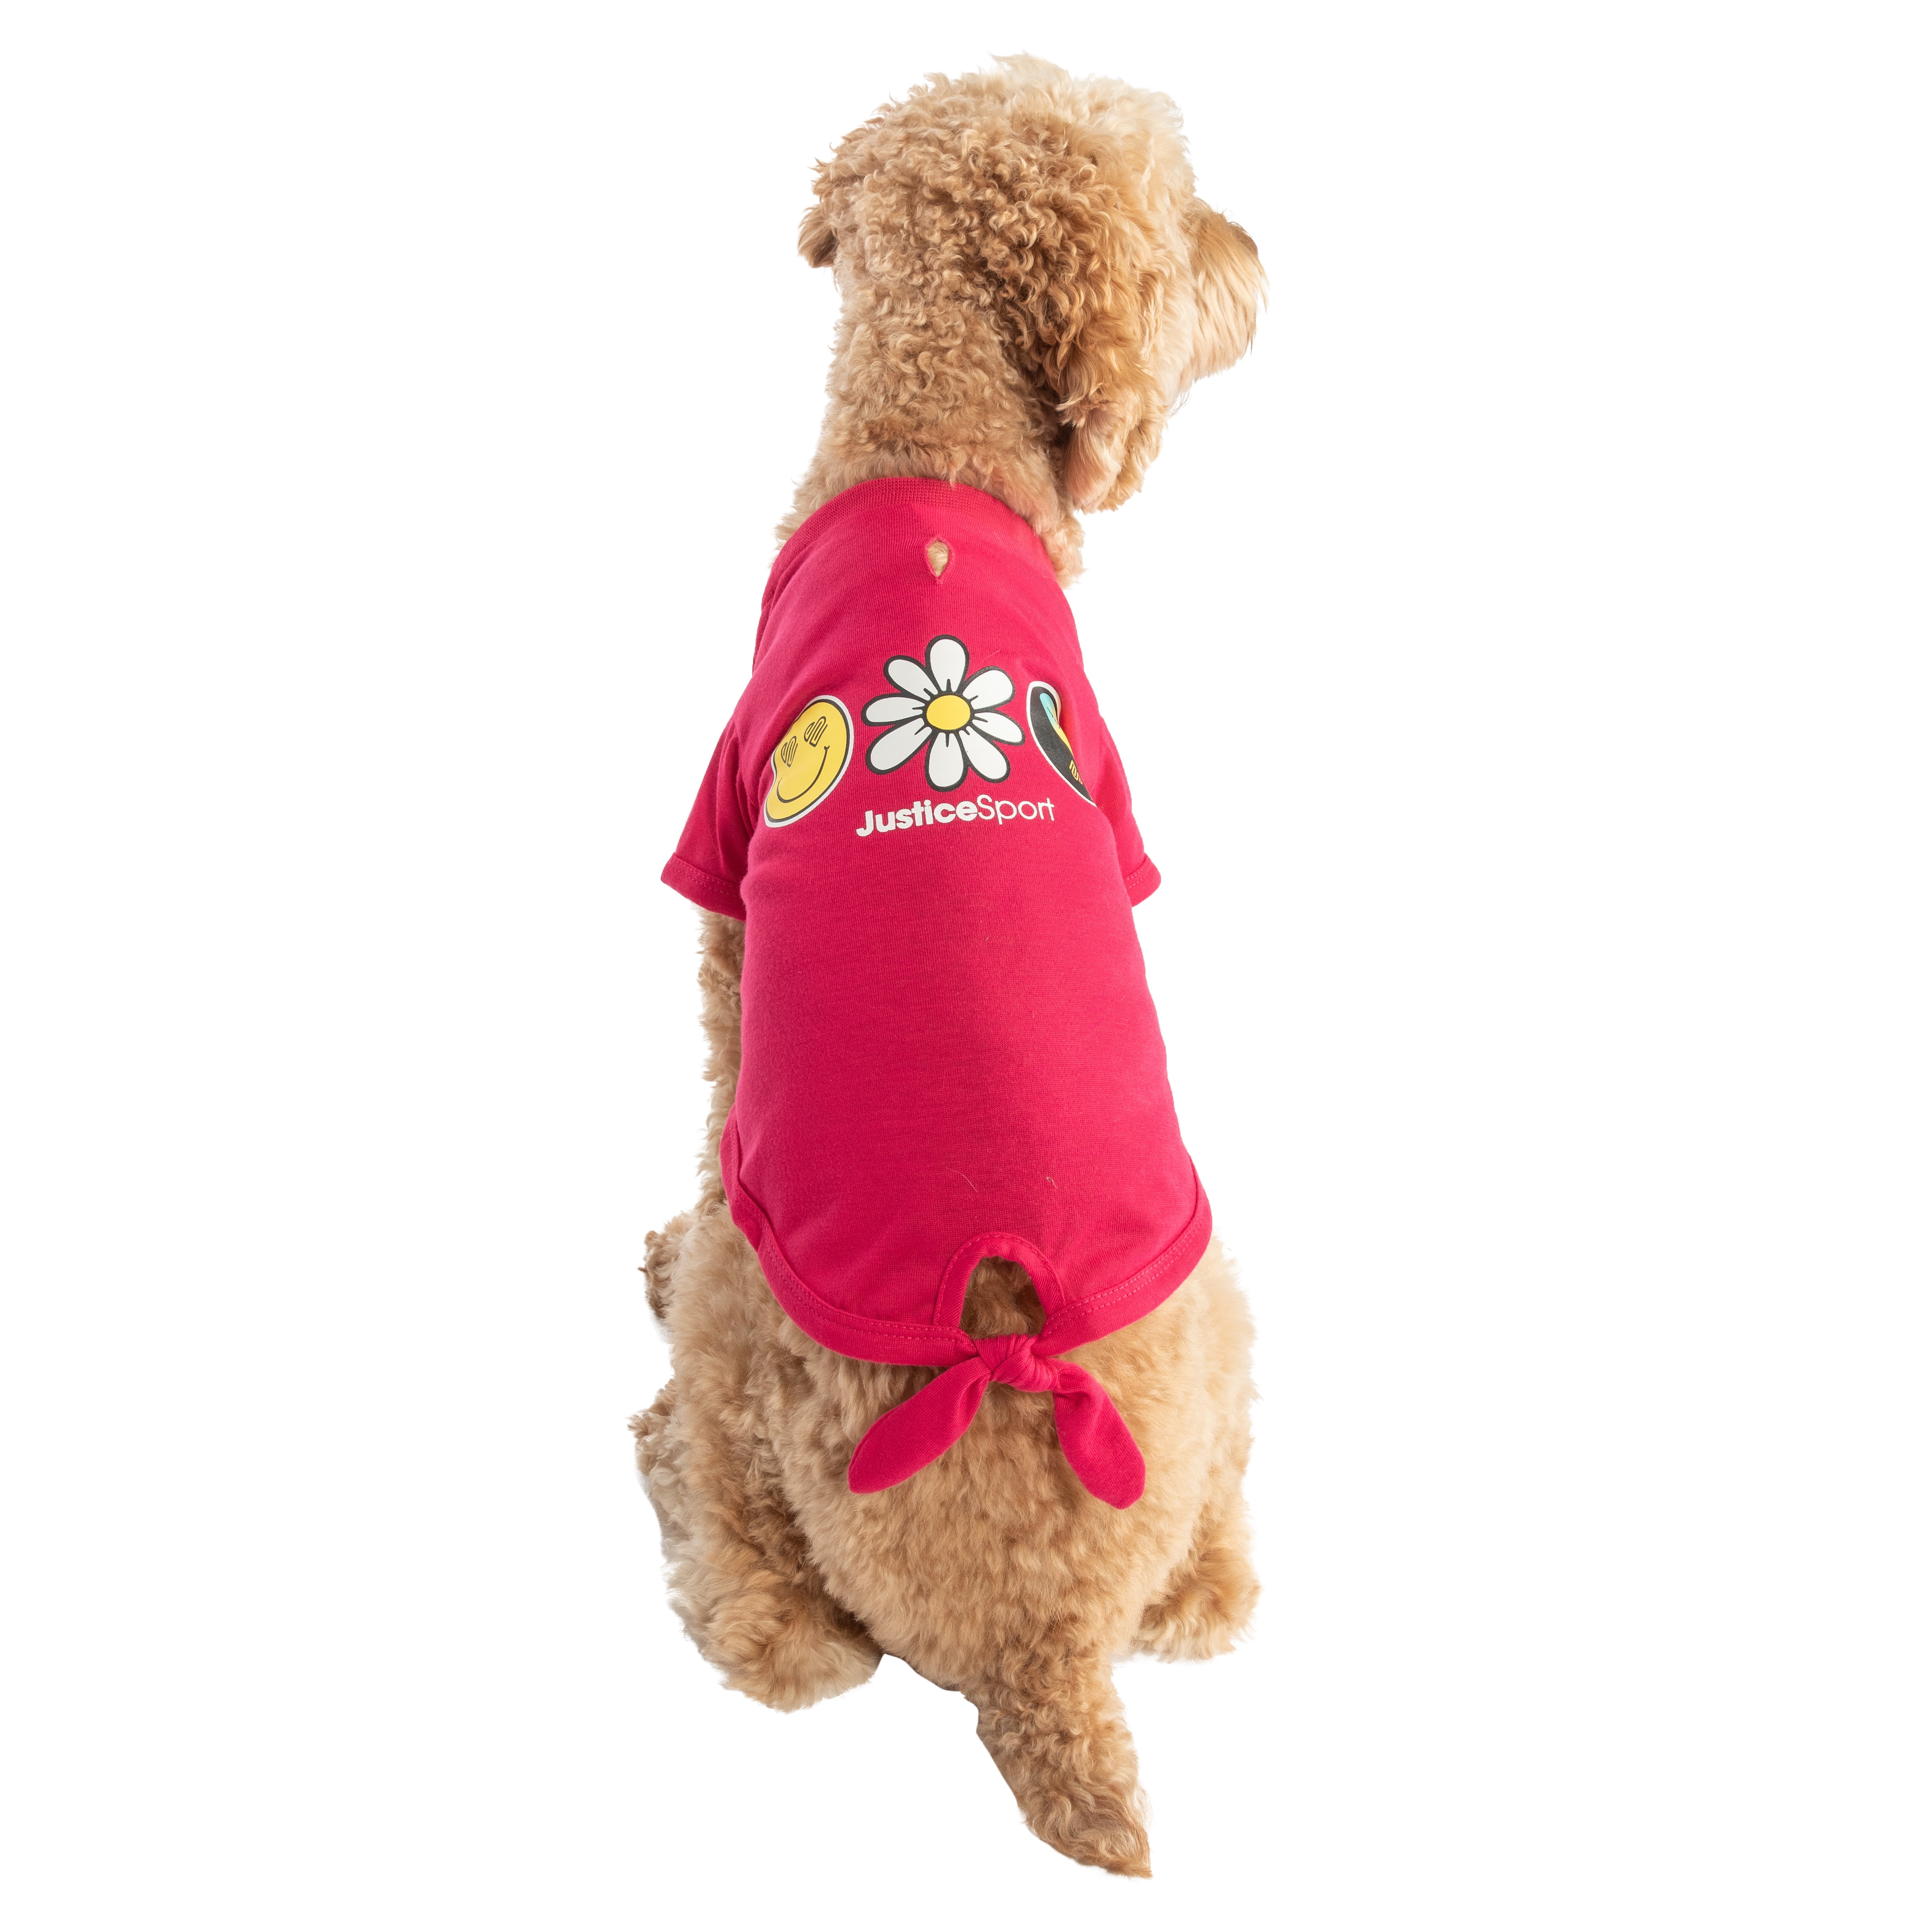 BARGAINS ON L Large ROSE RED Princess Dog Apparel Clothes Sweater Top Shirts 